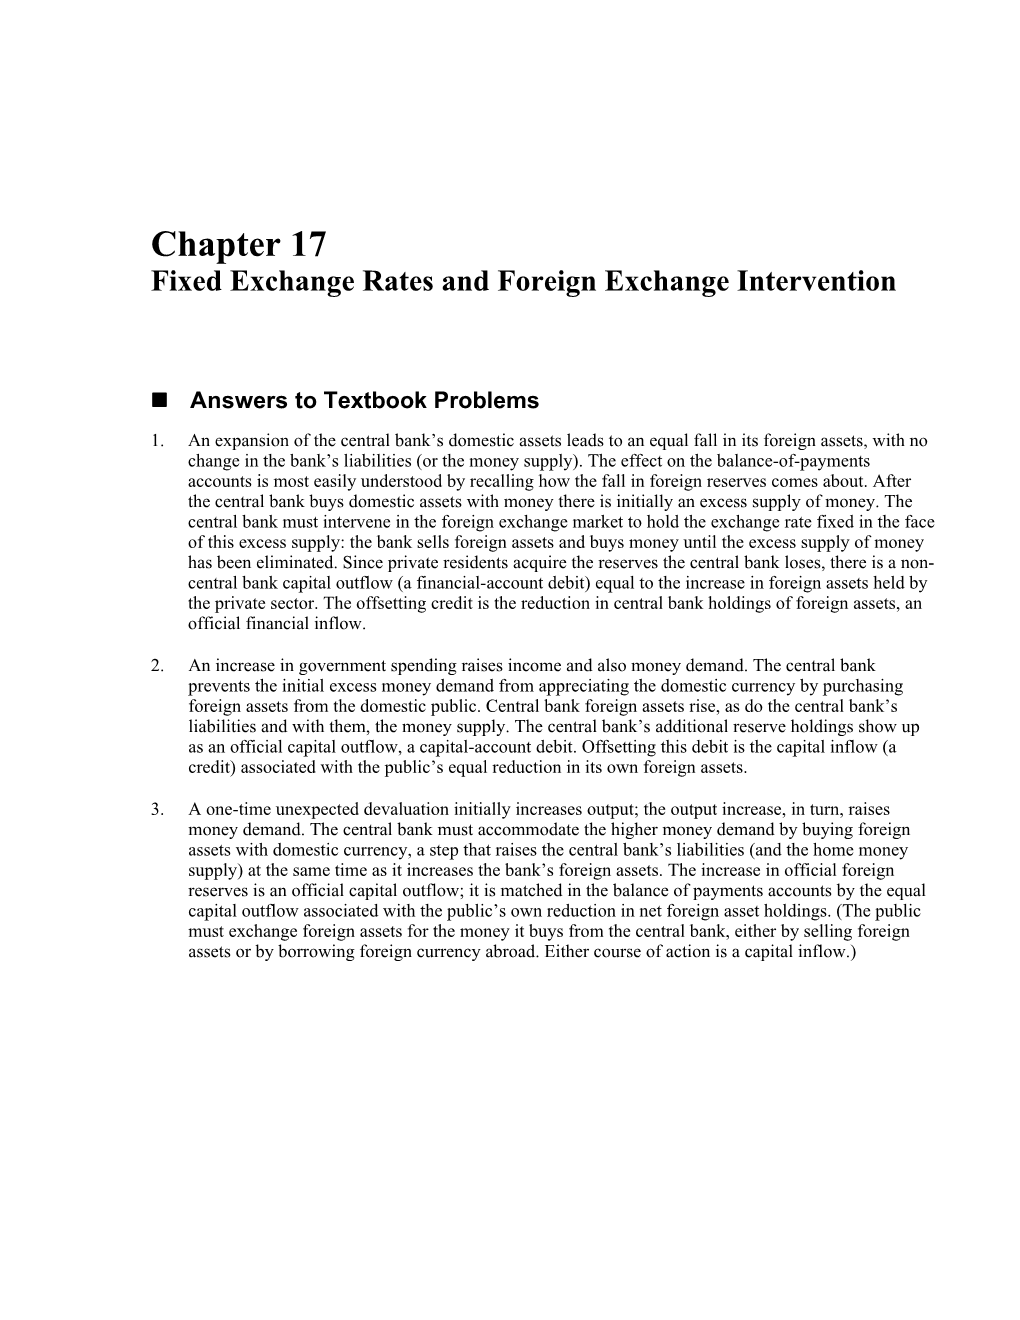 Chapter 17 Fixed Exchange Rates and Foreign Exchange Intervention 1